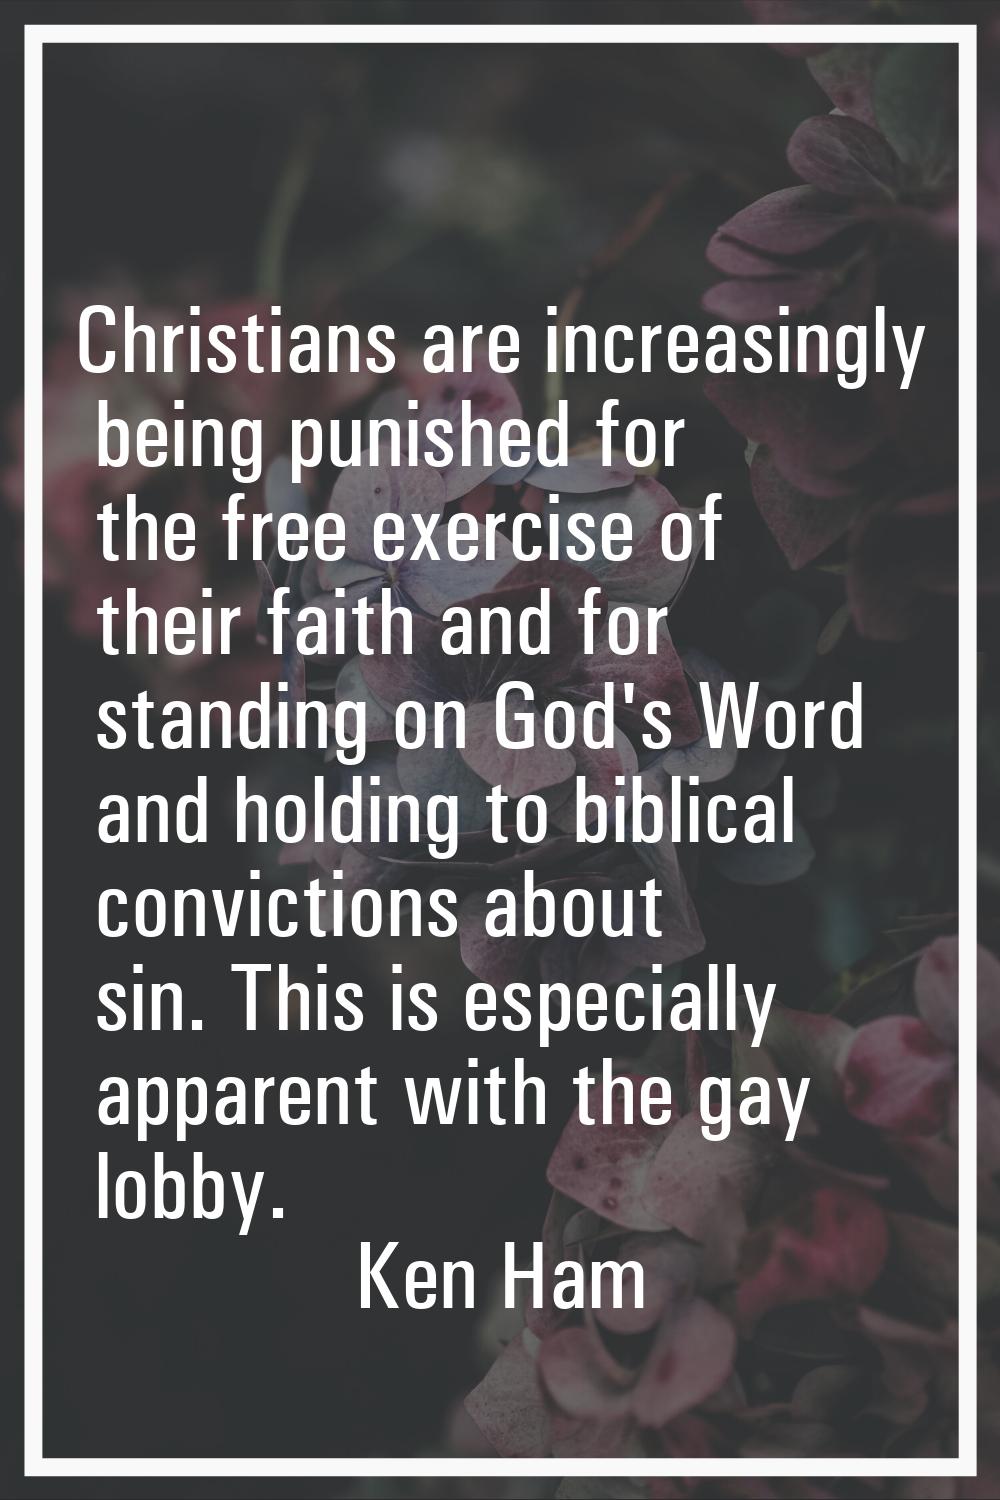 Christians are increasingly being punished for the free exercise of their faith and for standing on